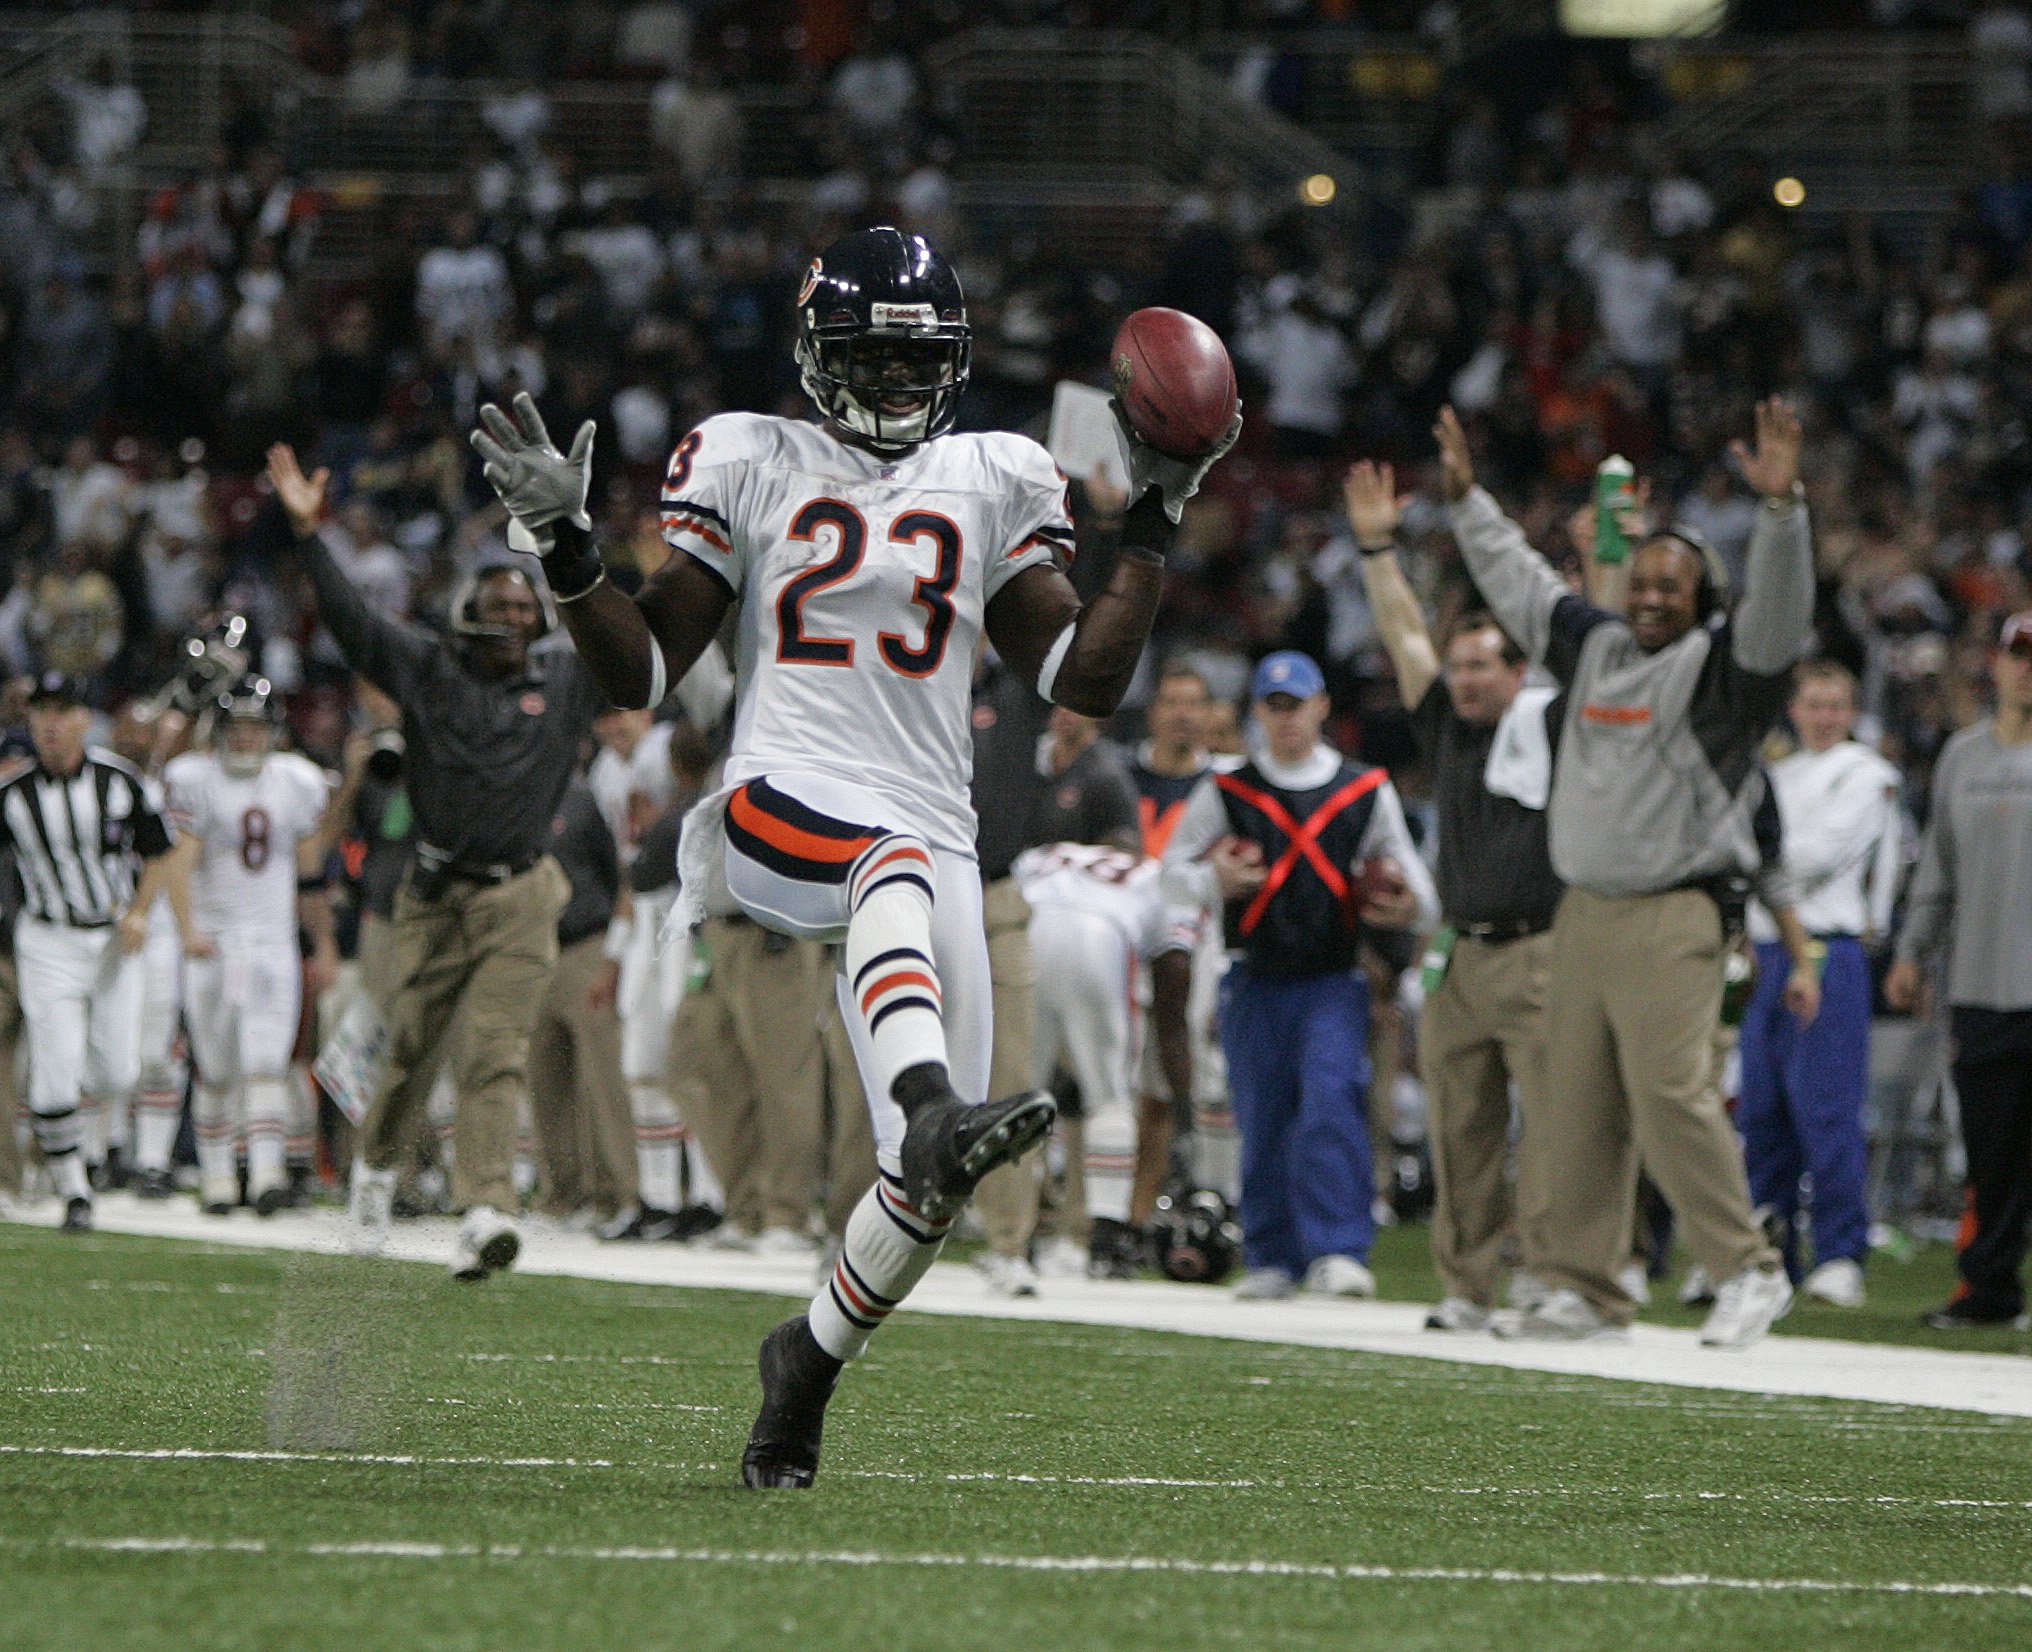 Is former Chicago Bears star Devin Hester a Hall of Famer? You bet